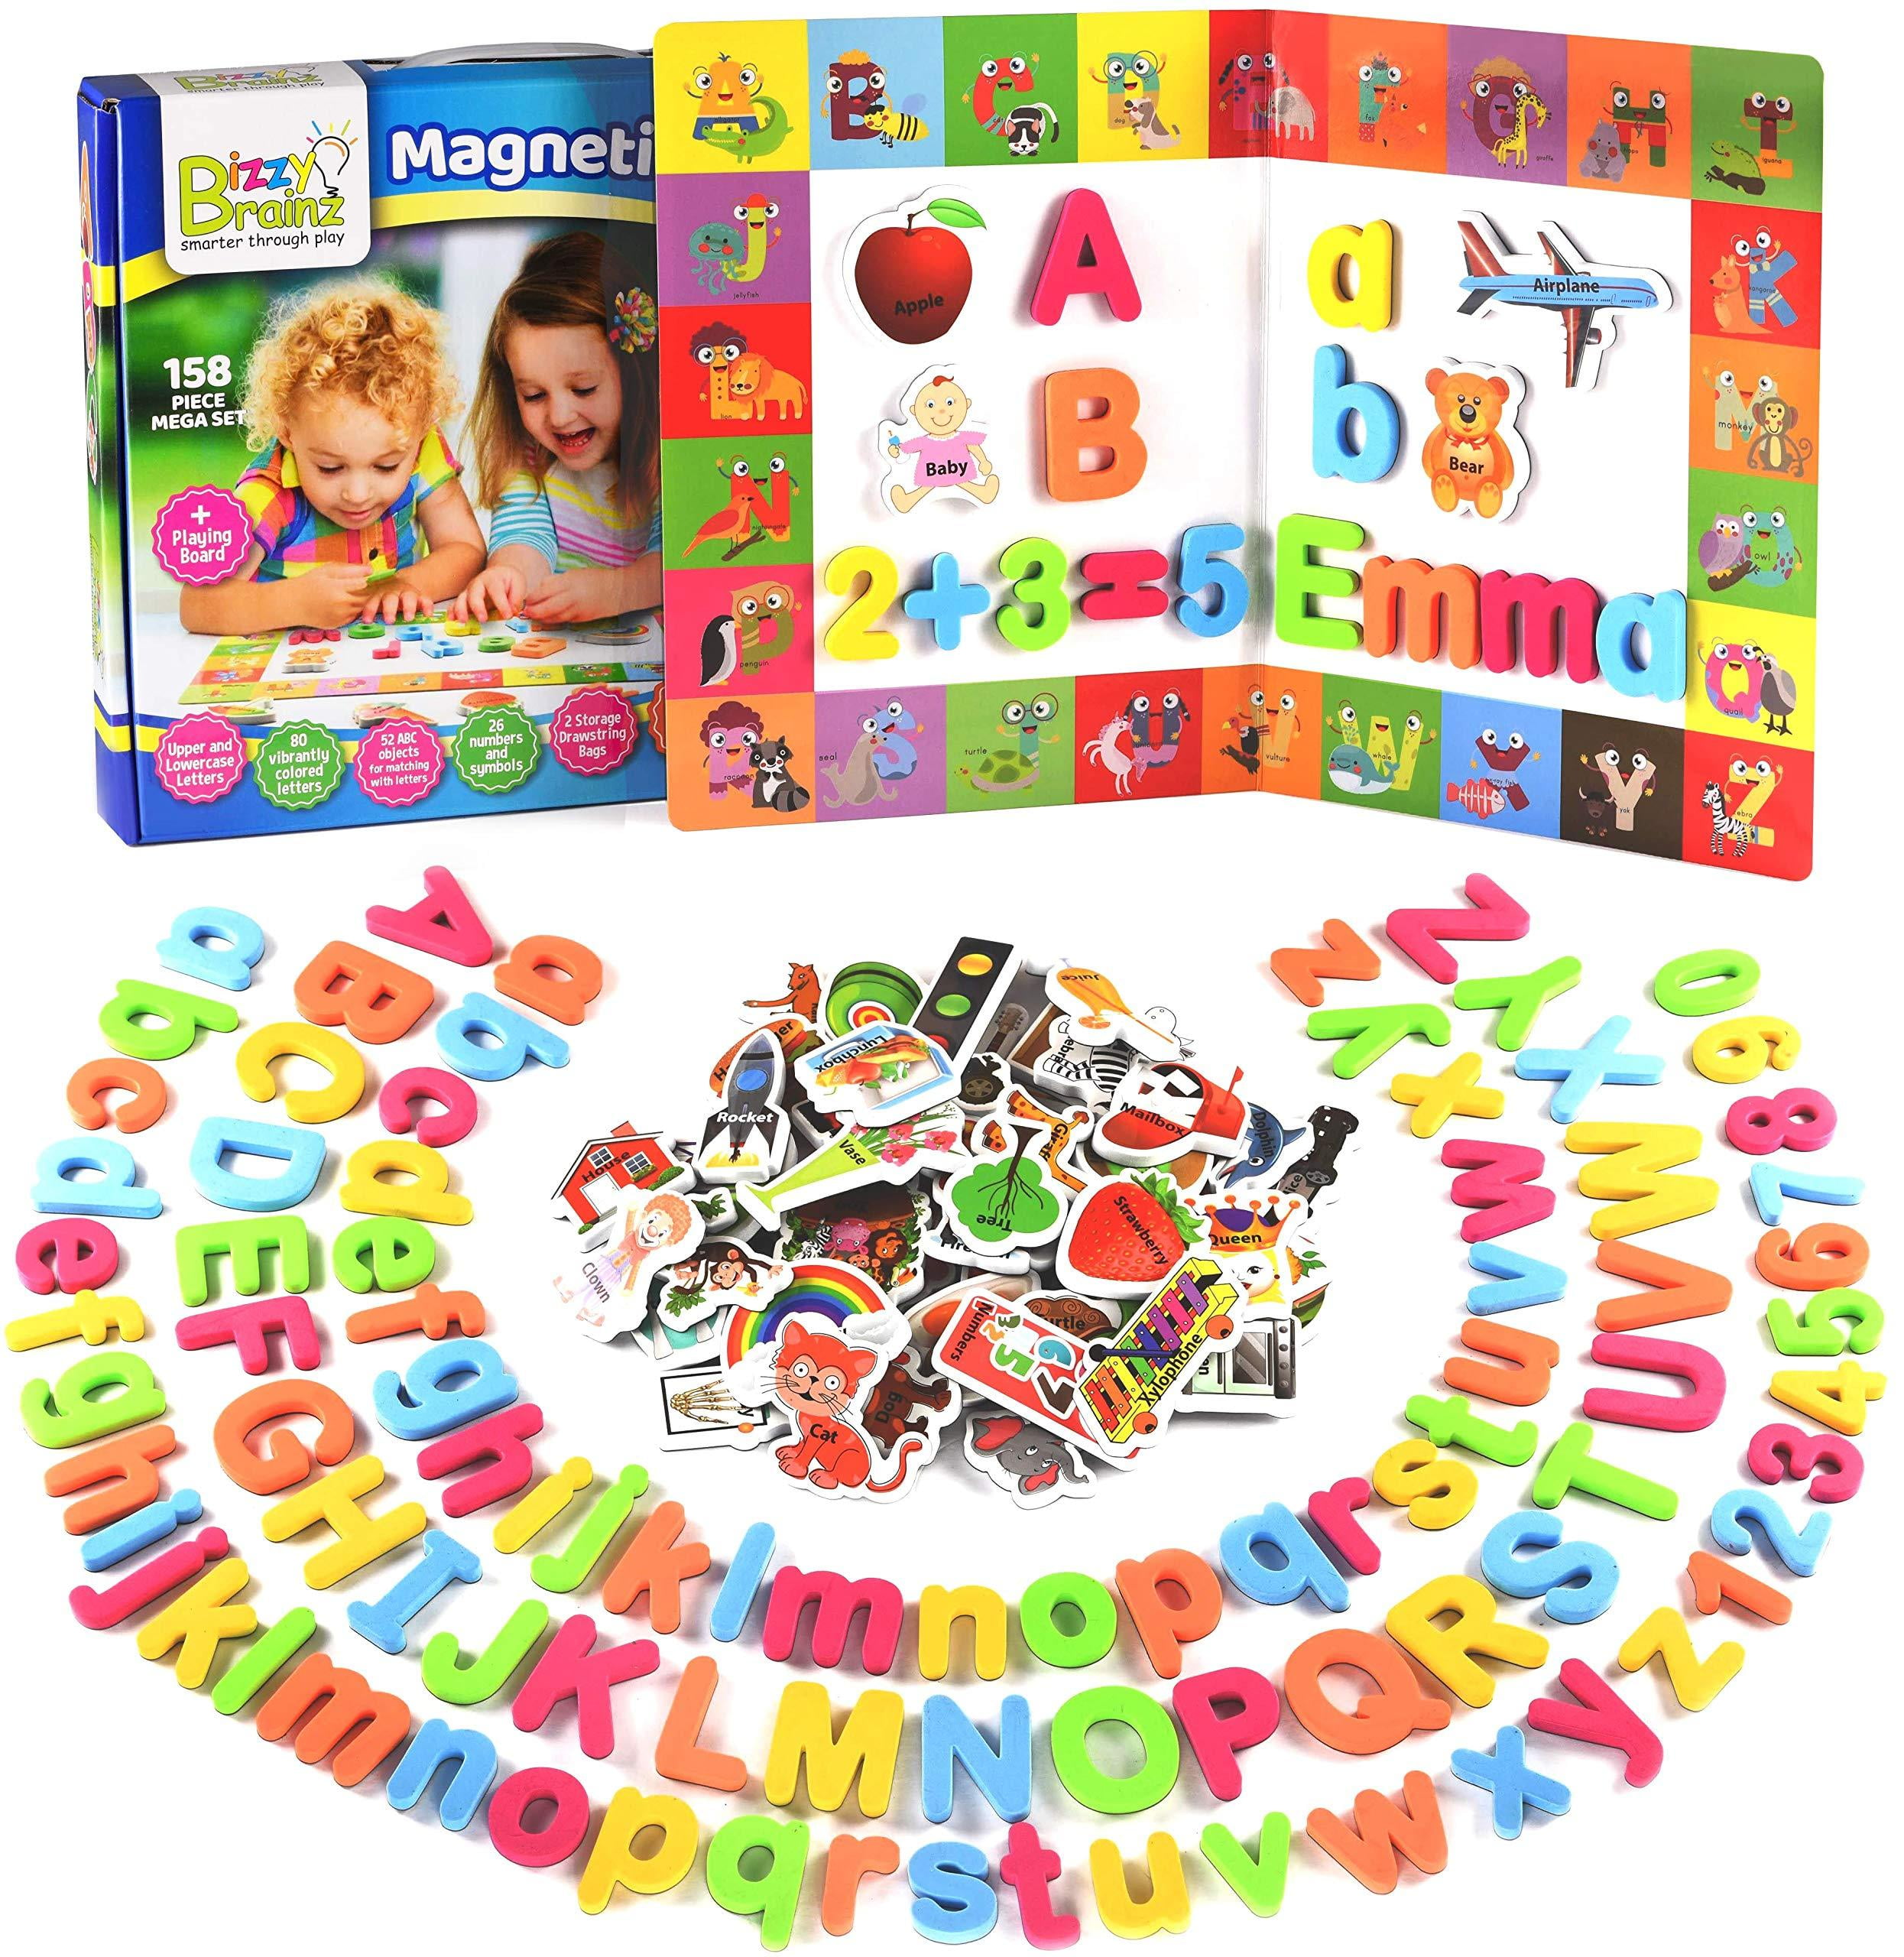 Magnetic Letters Childrens Kids Alphabet Magnets In Toy Case K3U4 Learning A1F8 